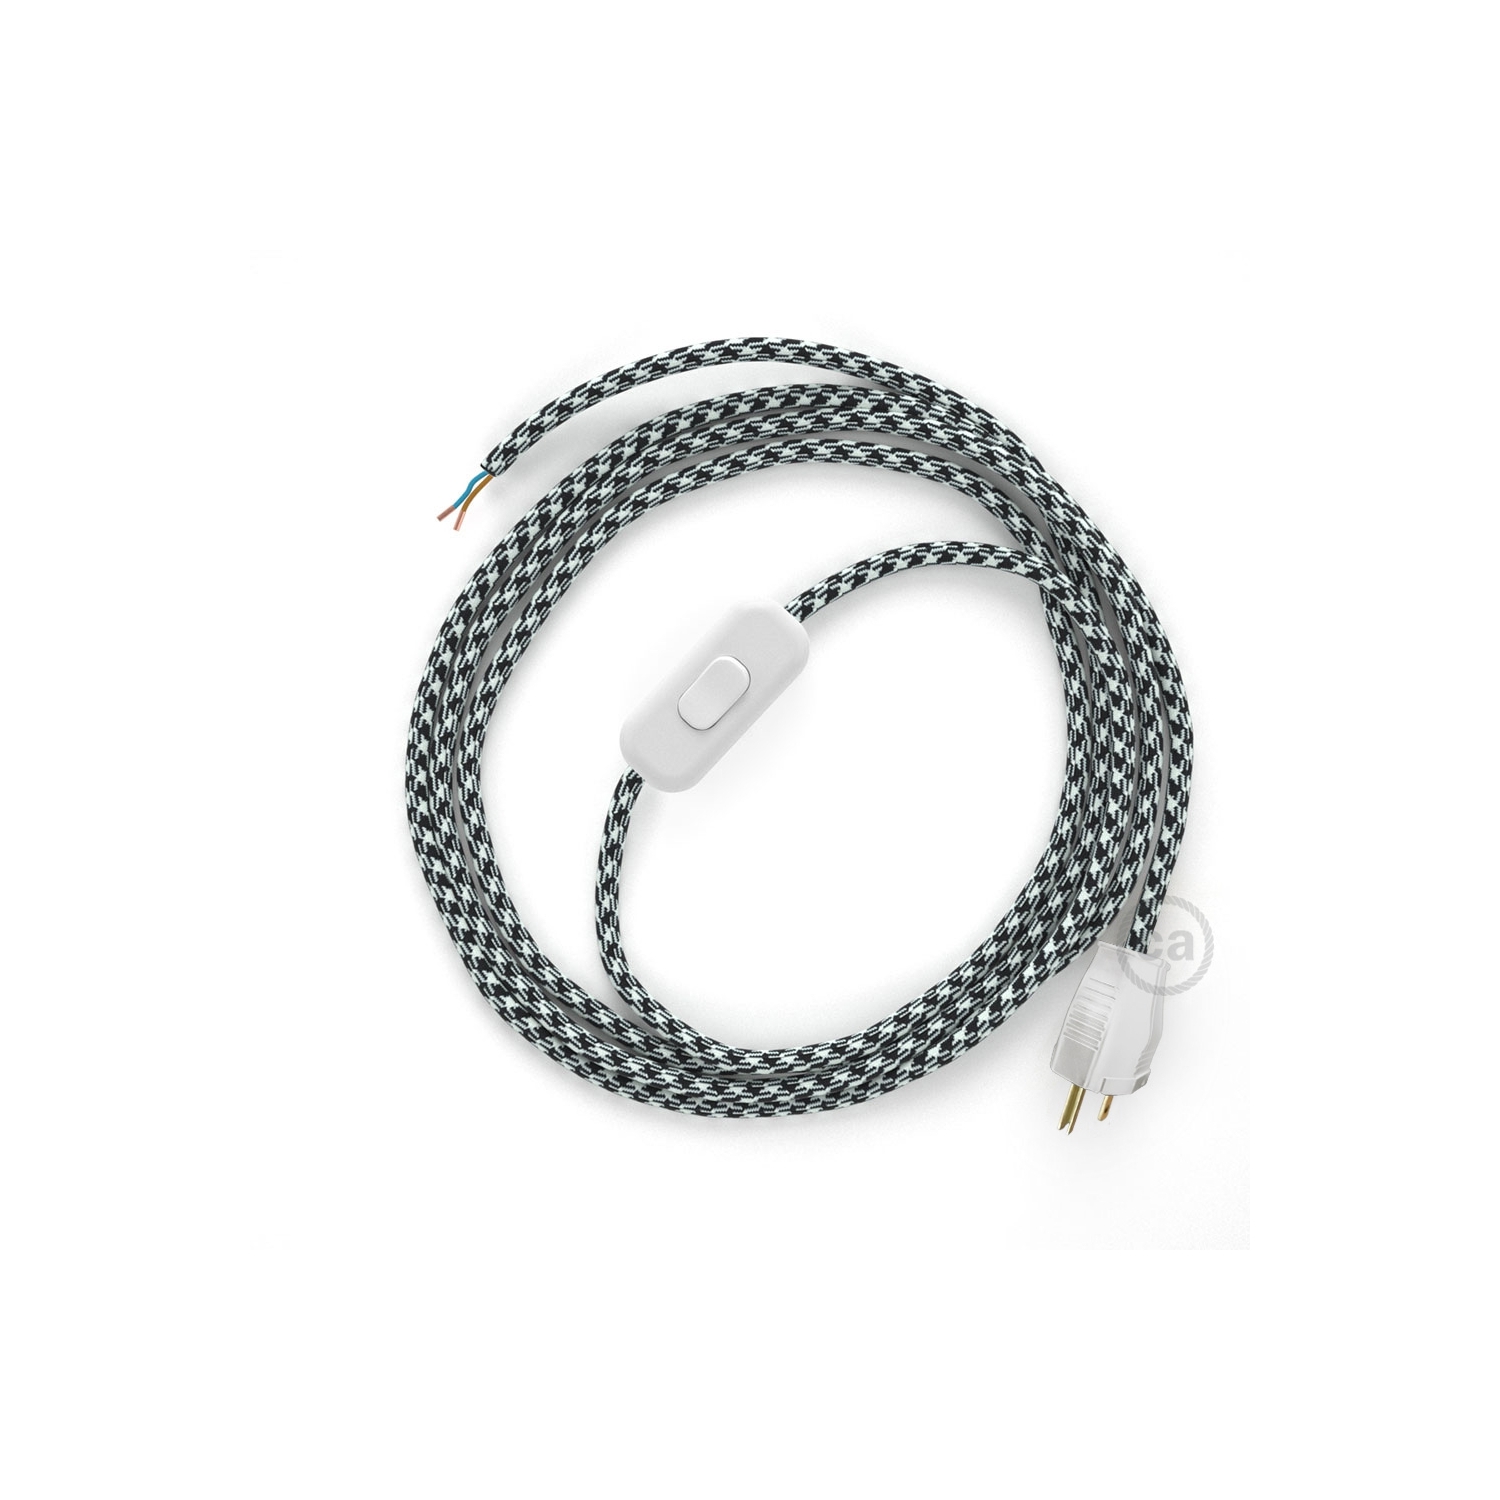 Power Cord with in-line switch, RP04 Black & White Houndstooth - Choose color of switch/plug